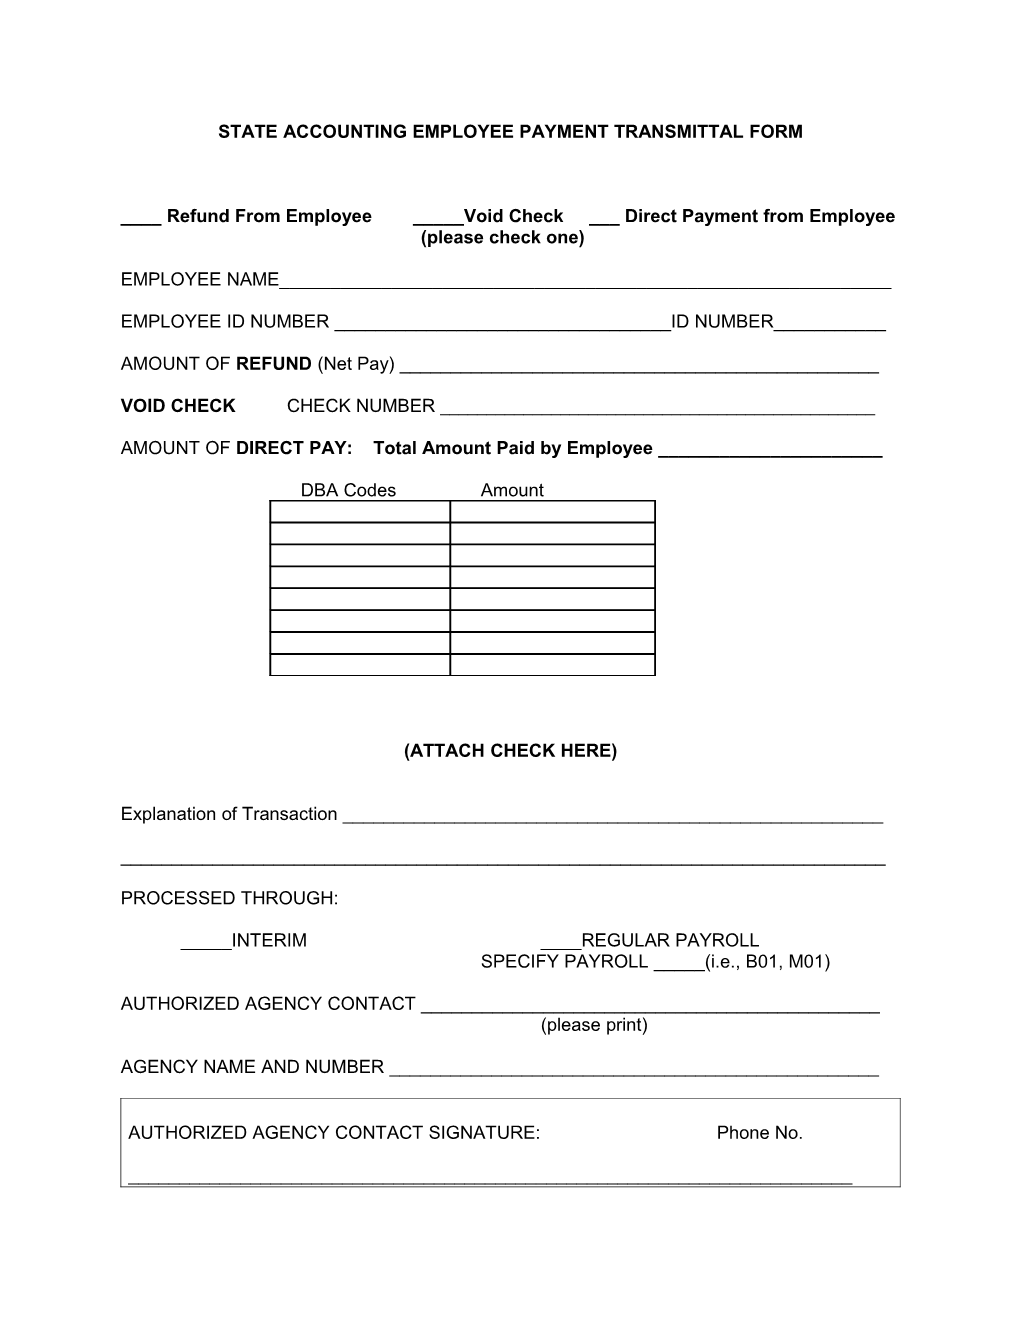 State Accounting Employee Payment Transmittal Form